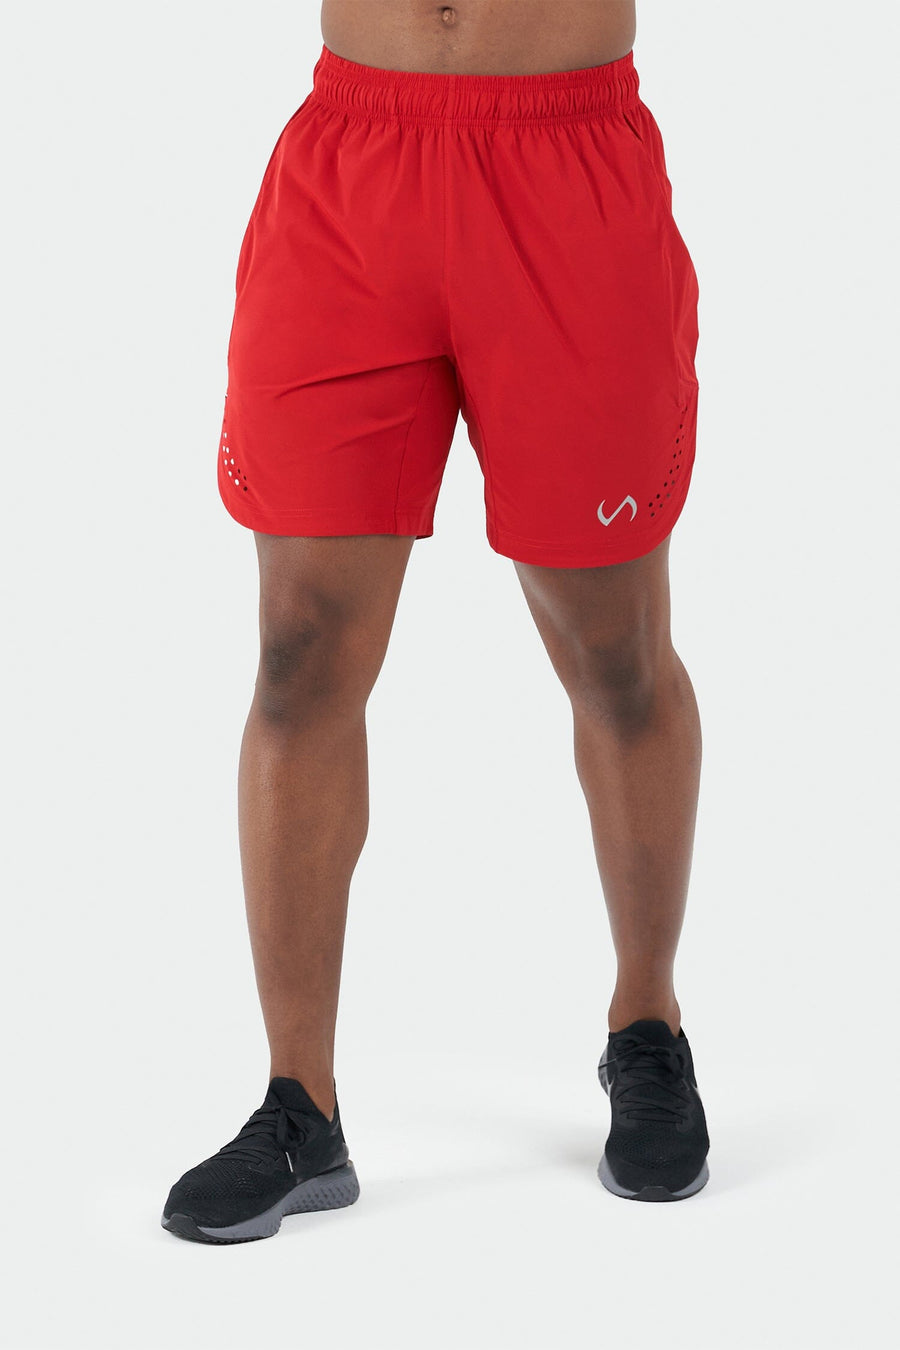 TLF Element 7 Inch - Red - 1 Shorts